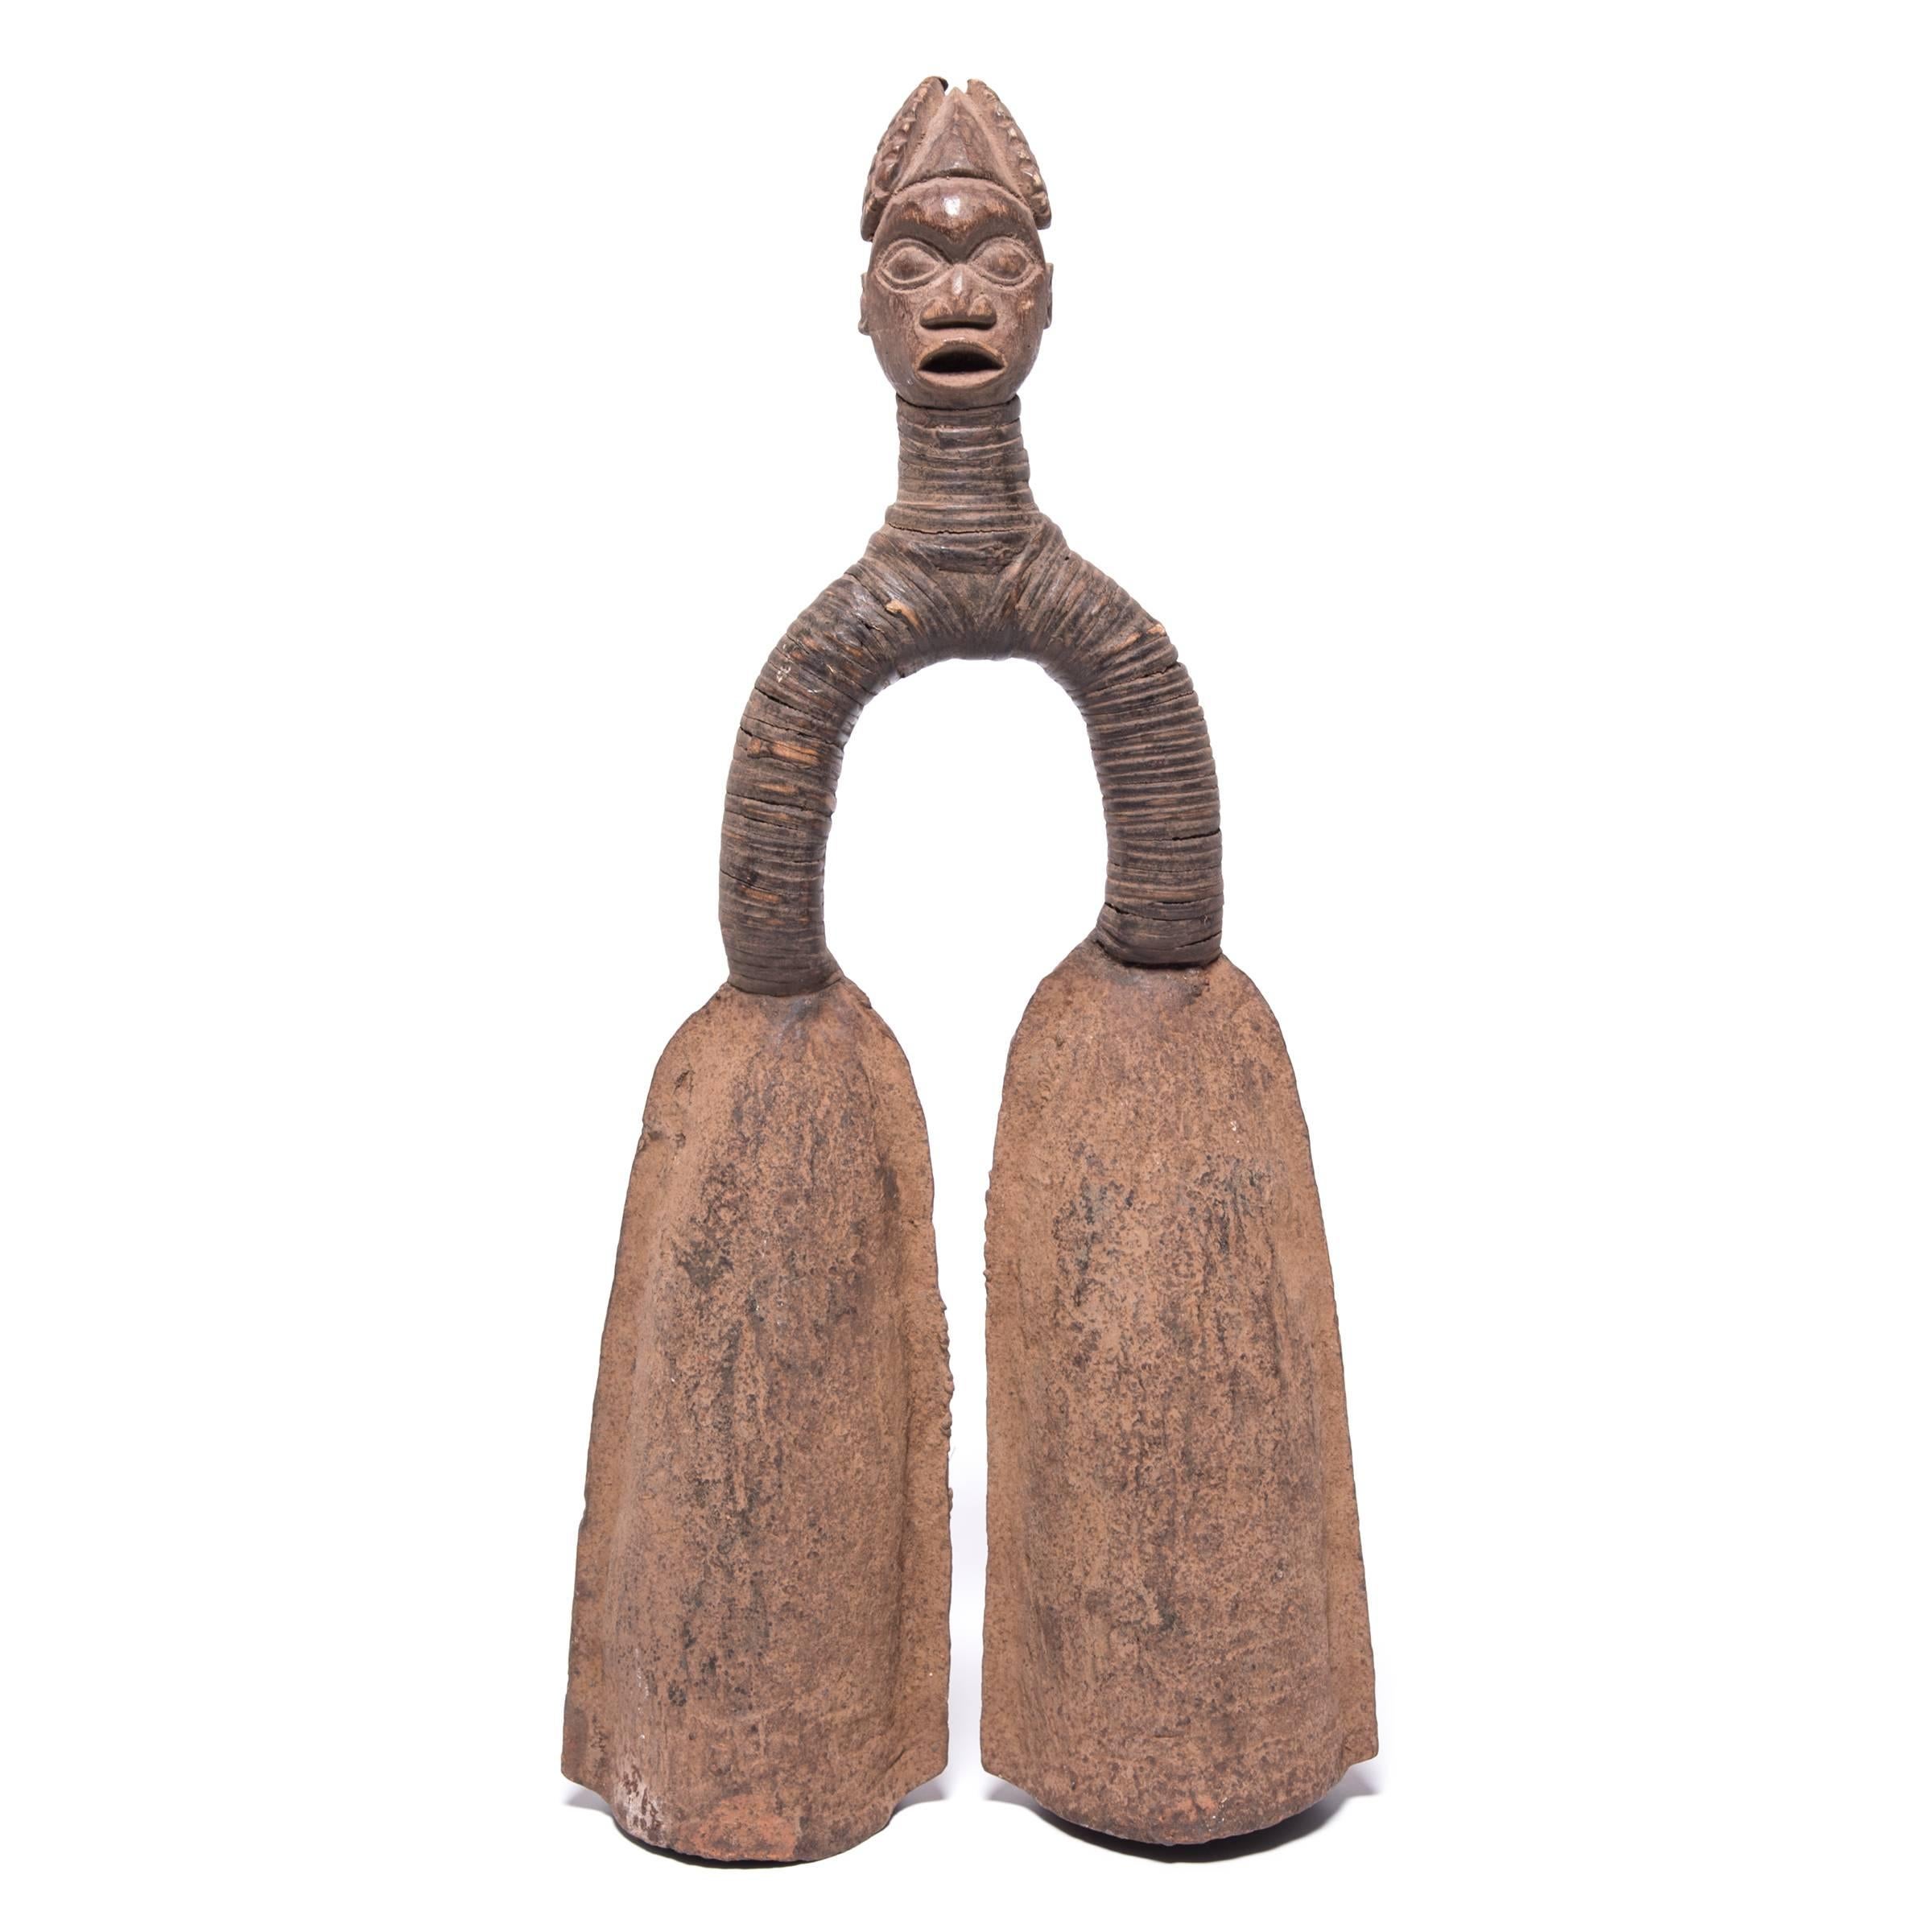 Like many pieces of traditional African metalwork, this pair of sculptural double bells served multiple purposes for the tribe. They were ceremonial instruments, status symbols, and traded as currency. Using a rubber coated stick, members of the